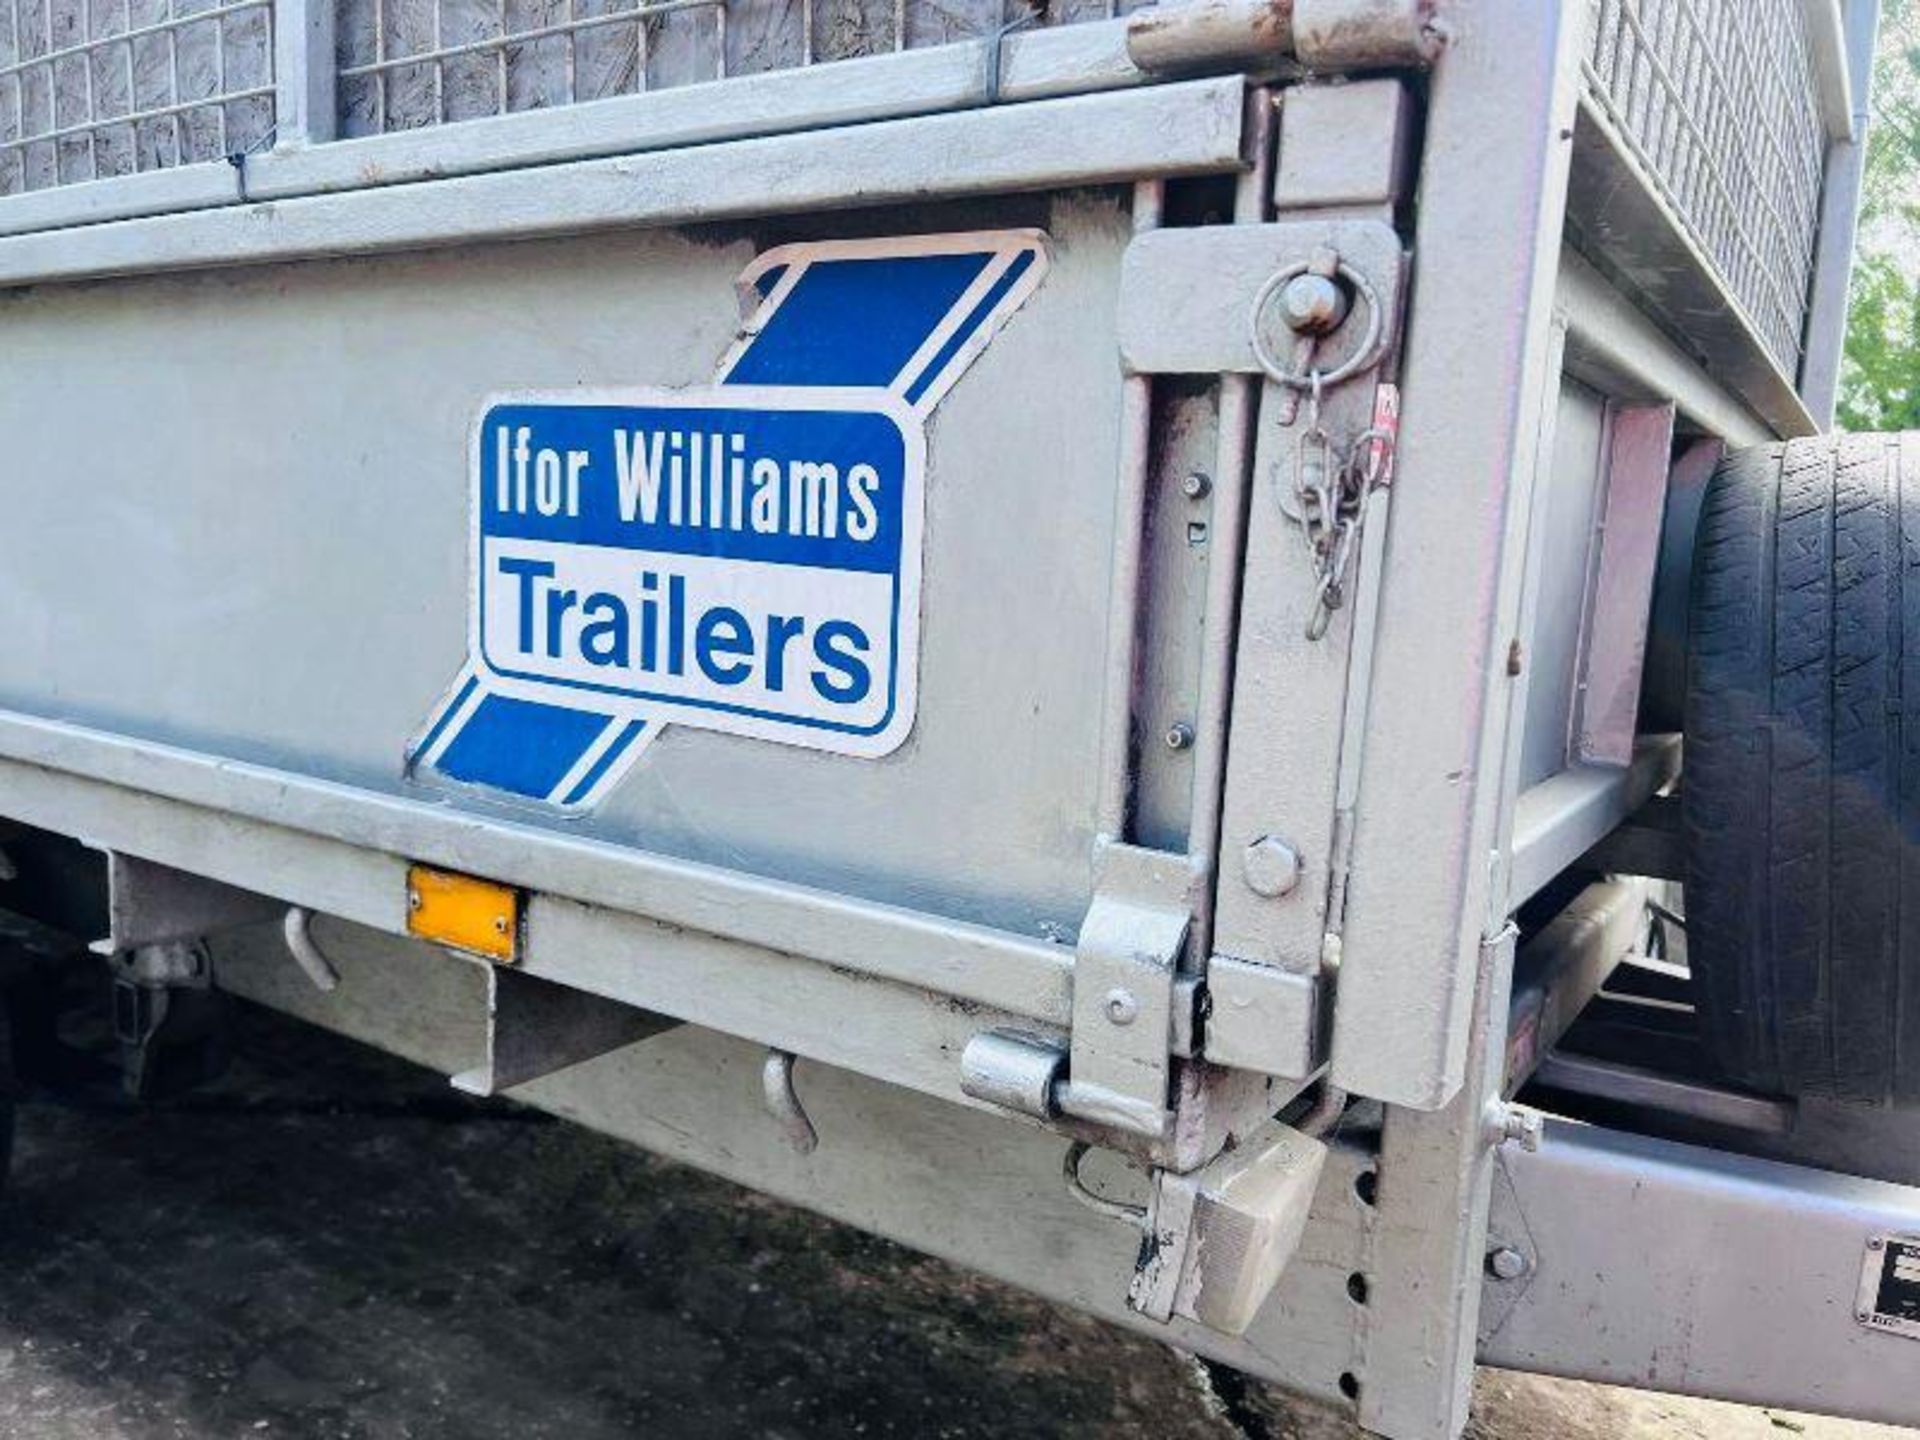 IFOR WILLIAMS LM125G DOUBLE AXLE DROP SIDE TRAILER C/W HIGH SIDED CAGE SIDES - Image 10 of 13